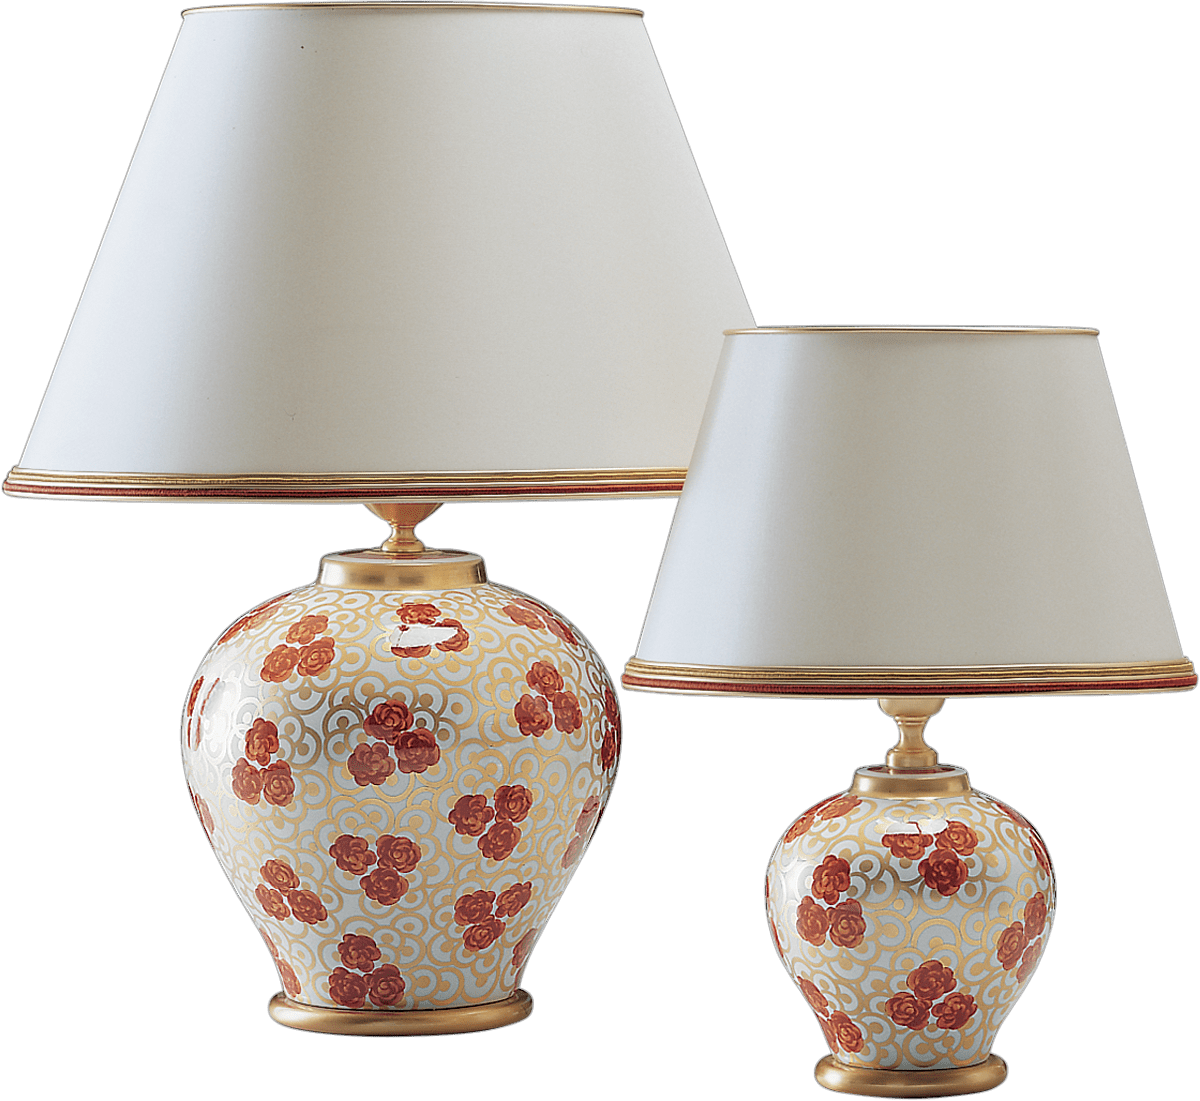 TABLE LAMP 4015